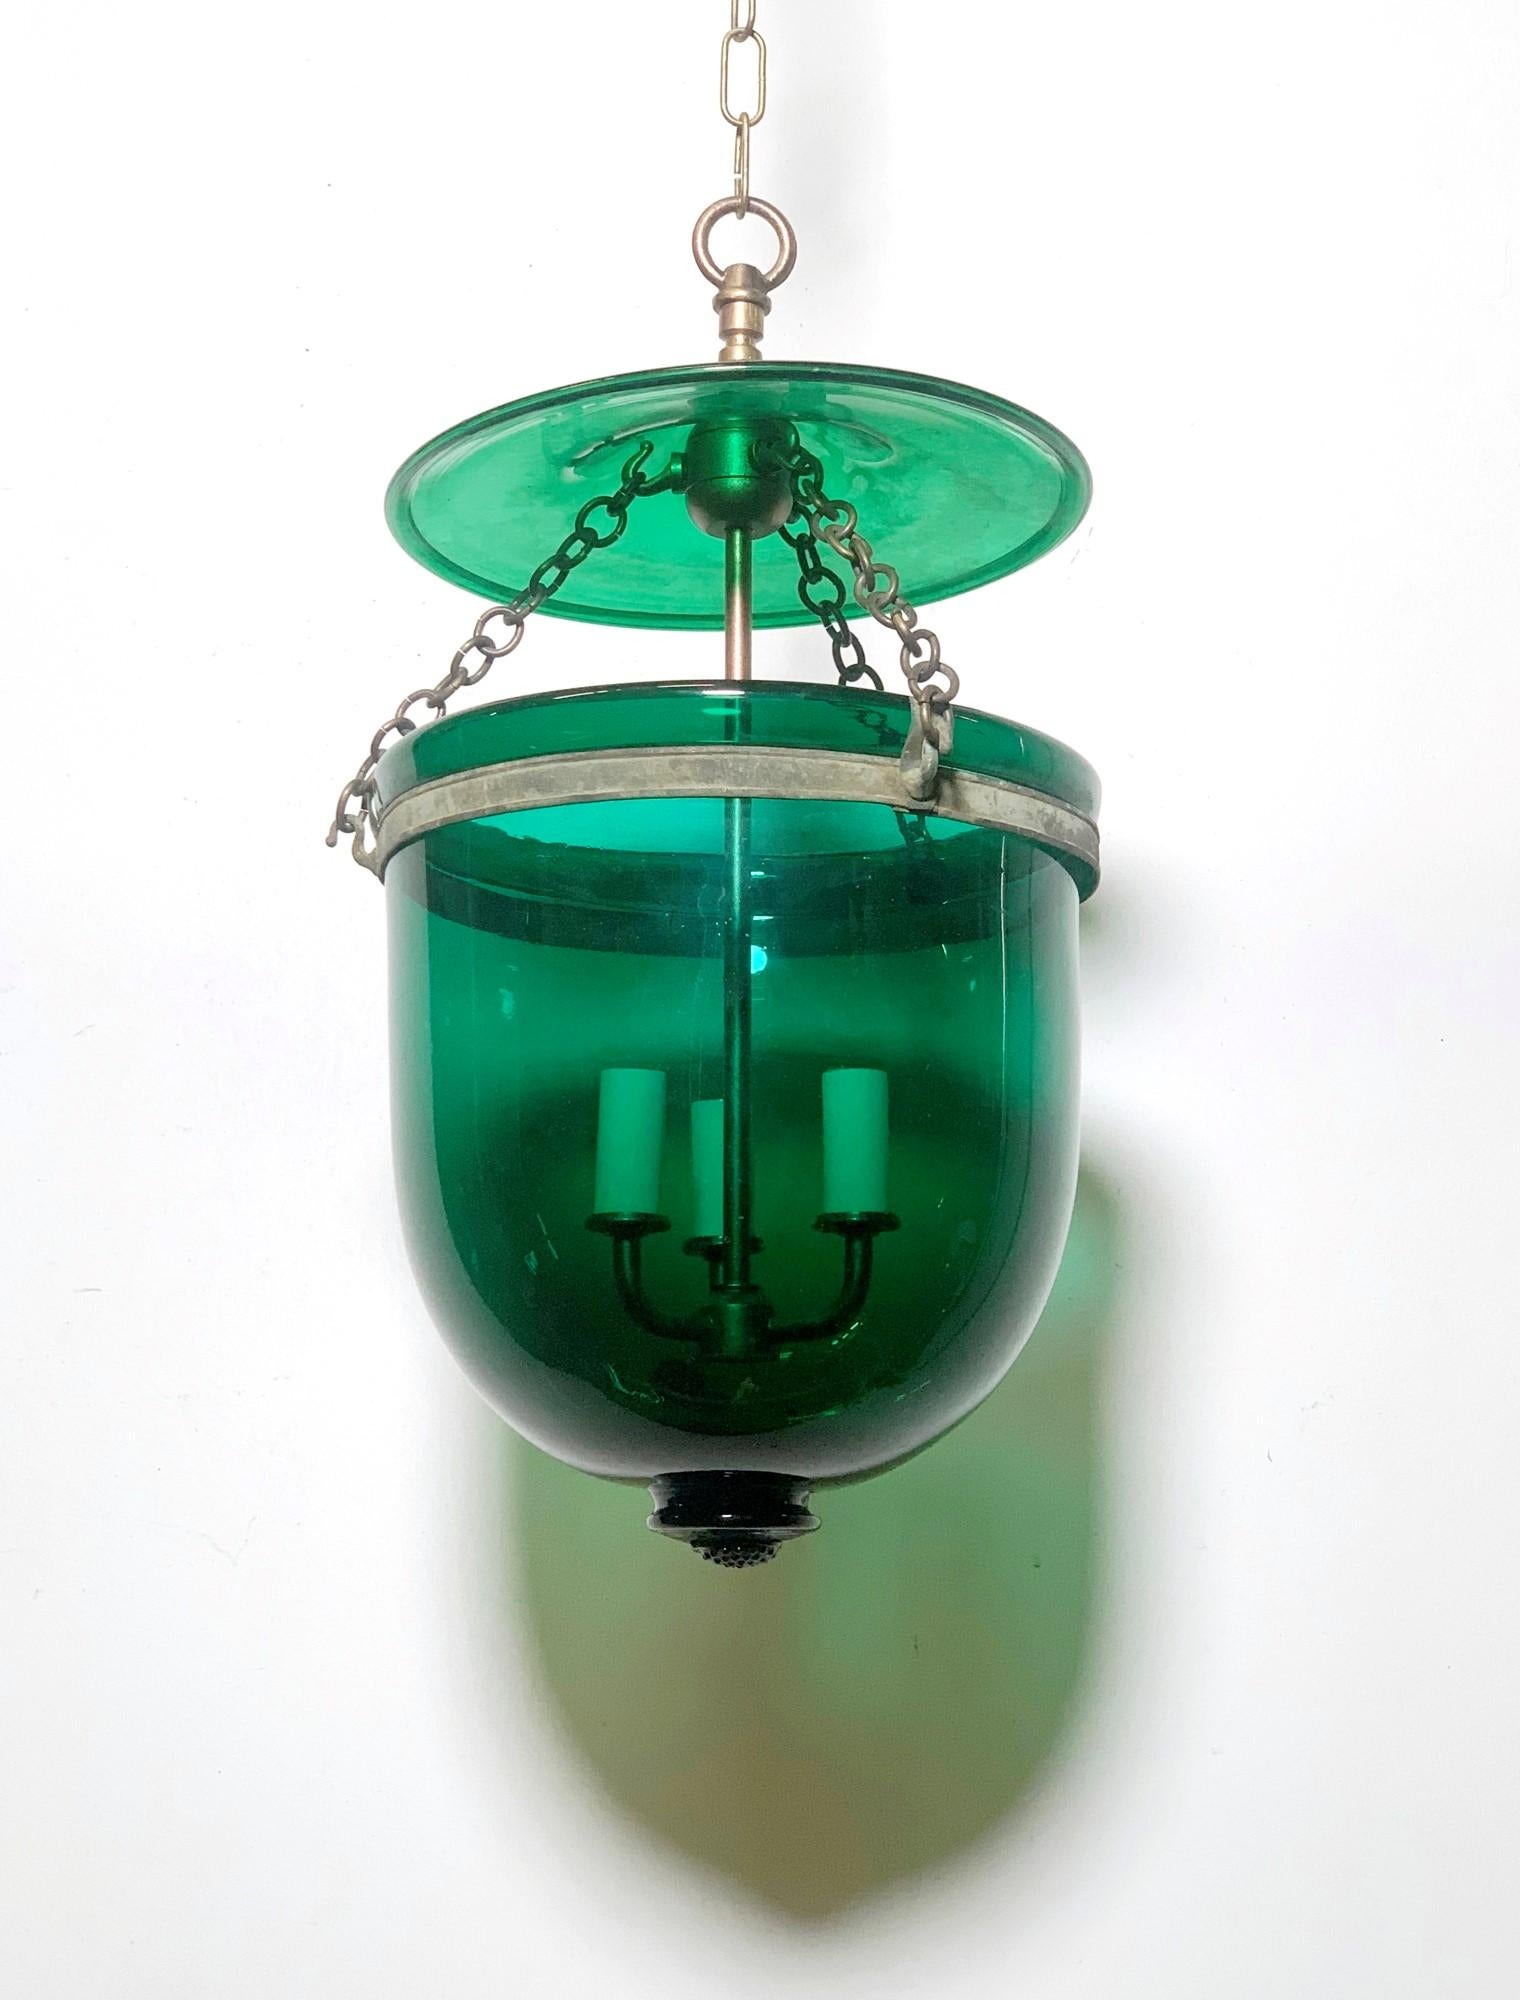 Antique original hand blown green glass bell jar and lid pendant light from Europe. Features new brass hardware and wiring. This can be seen at our 400 Gilligan St location in Scranton, PA.